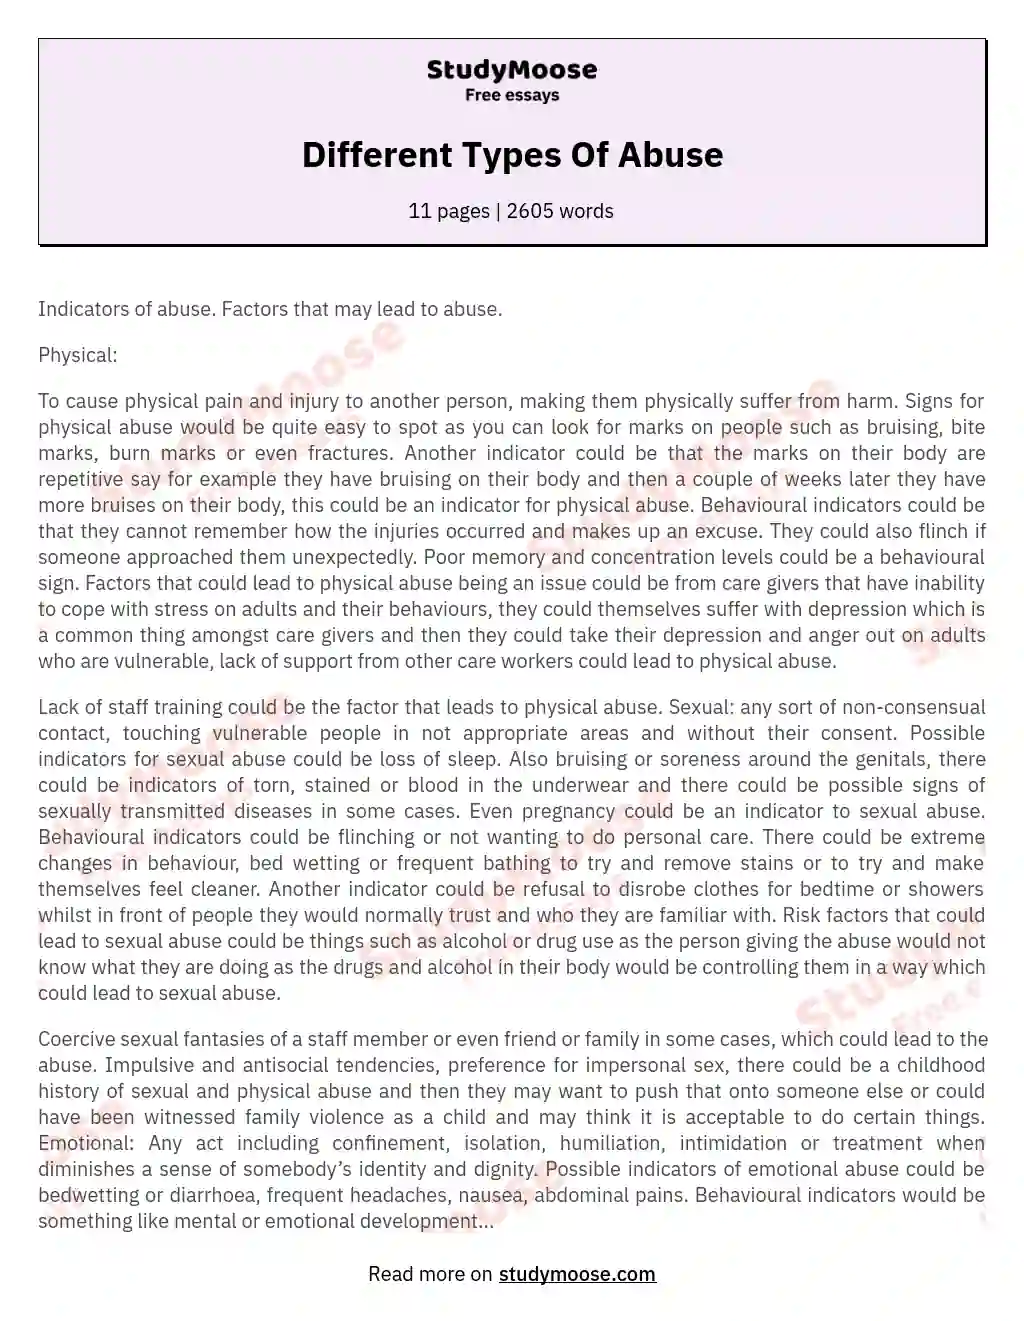 Different Types Of Abuse essay